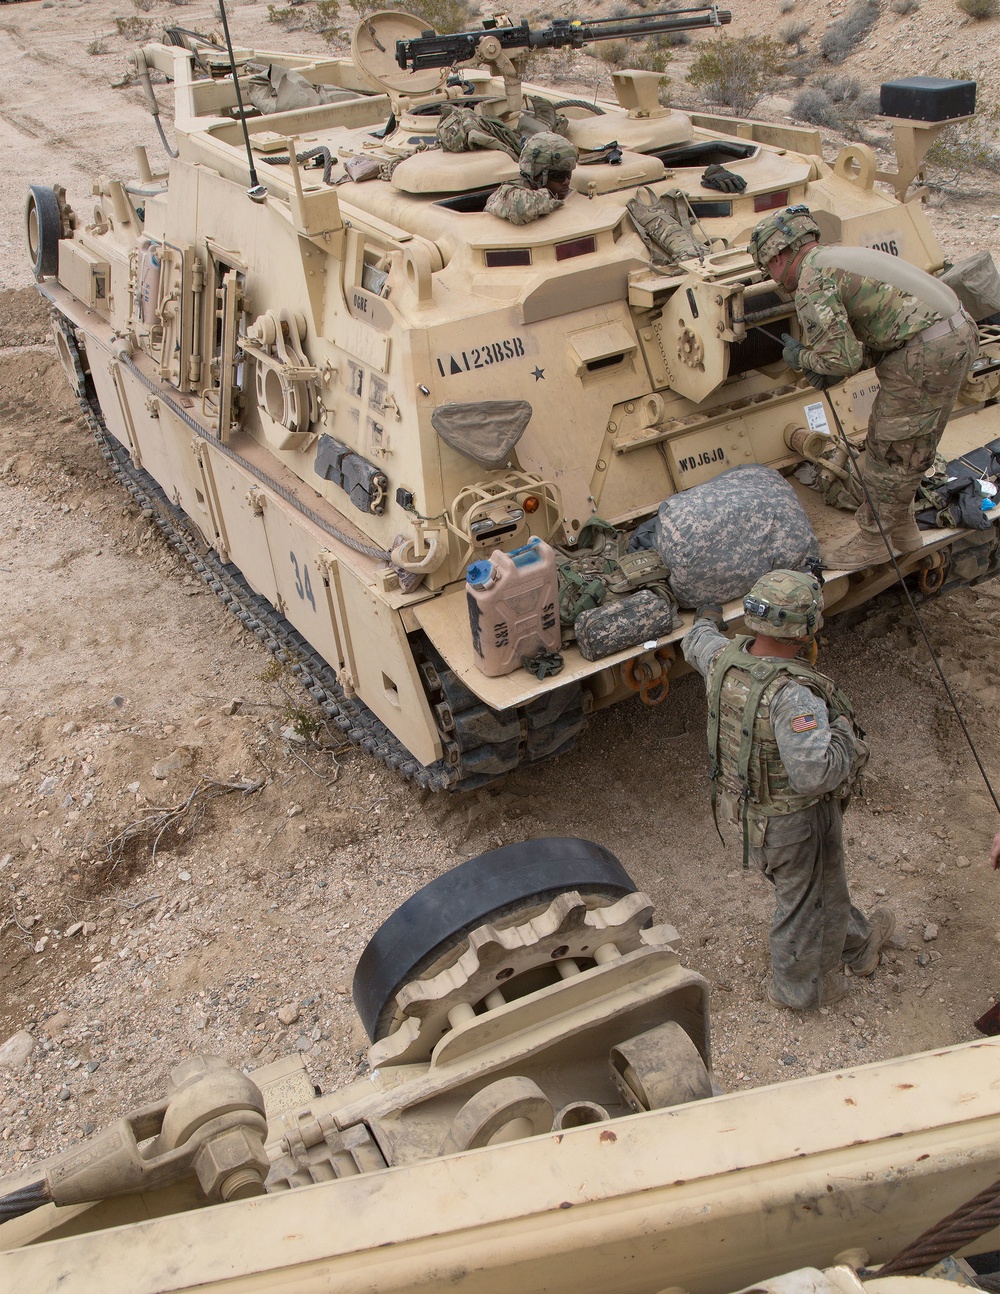 Soldiers assigned to the 1st Battalion, 67th Armored Regiment, 3rd Brigade Combat Team, 1st Armored Division, stock maintenance supplies on a M88A2 Hercules recovery vehicle during Decisive Action Training Exercise 16-05 at the National Training Center in Fort Irwin, Calif